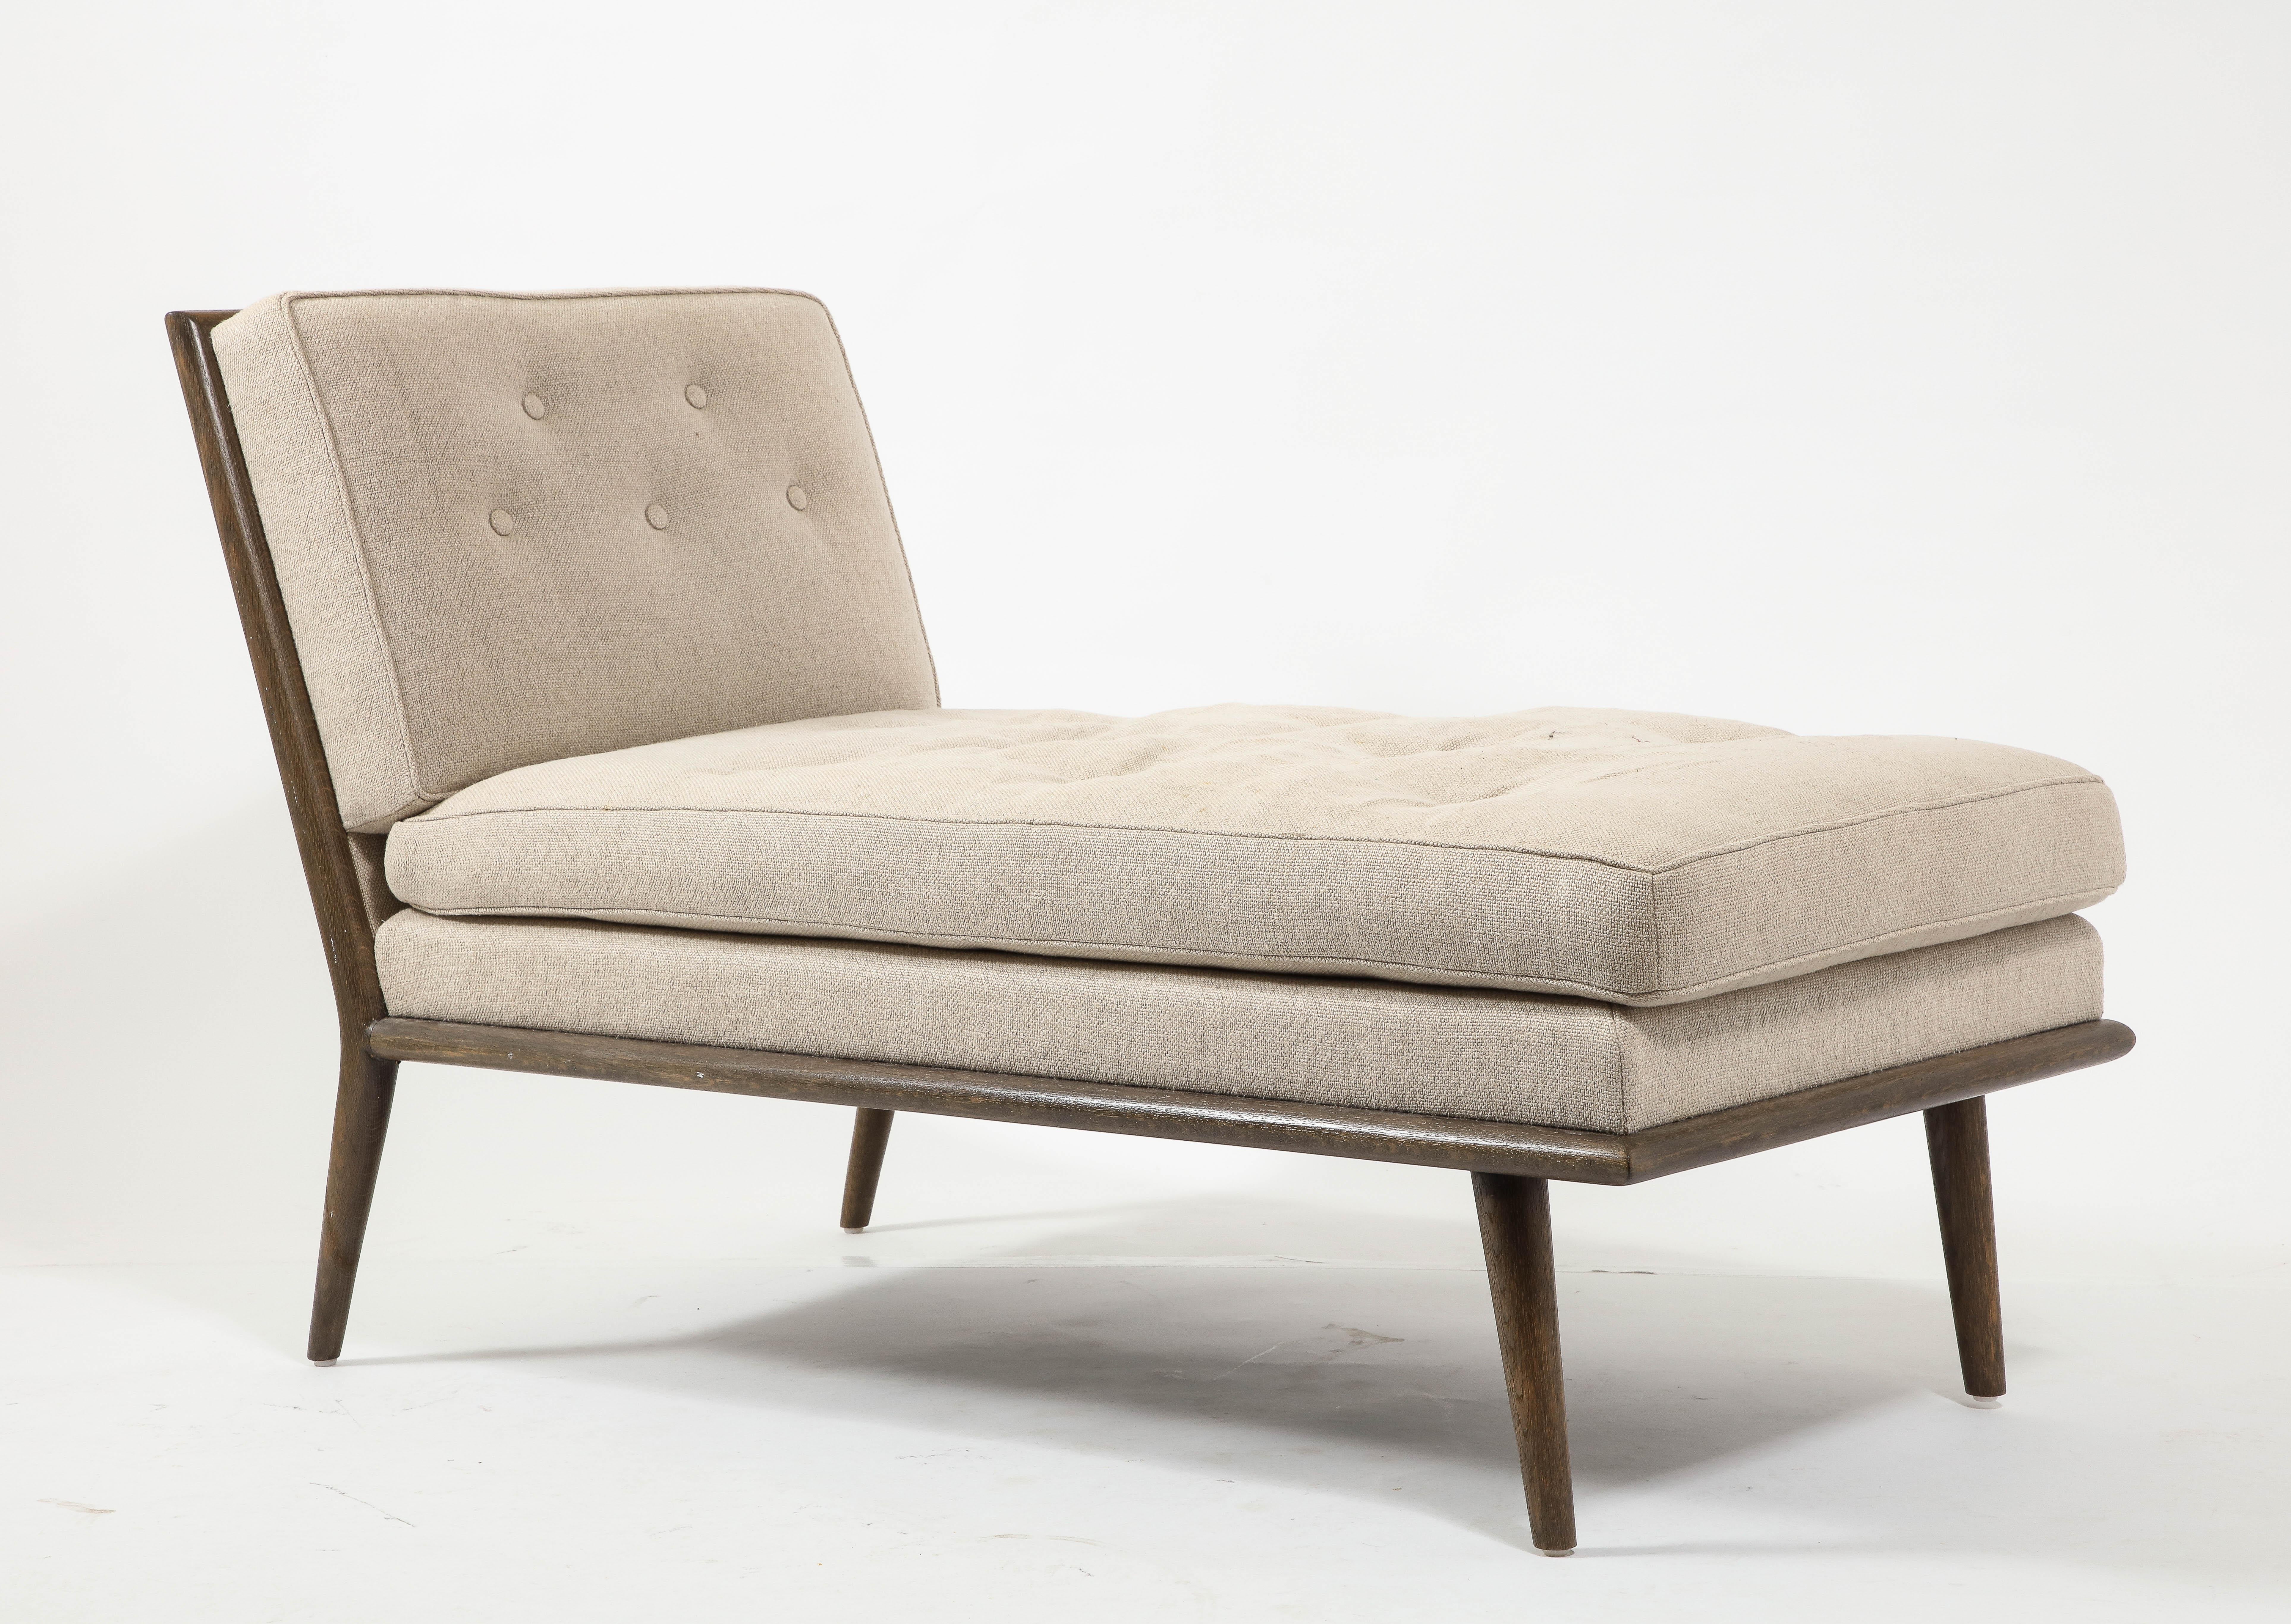 T.H. Robsjohn-Gibbings Reproduction Chaise Lounge, USA 2018 In Good Condition For Sale In New York, NY